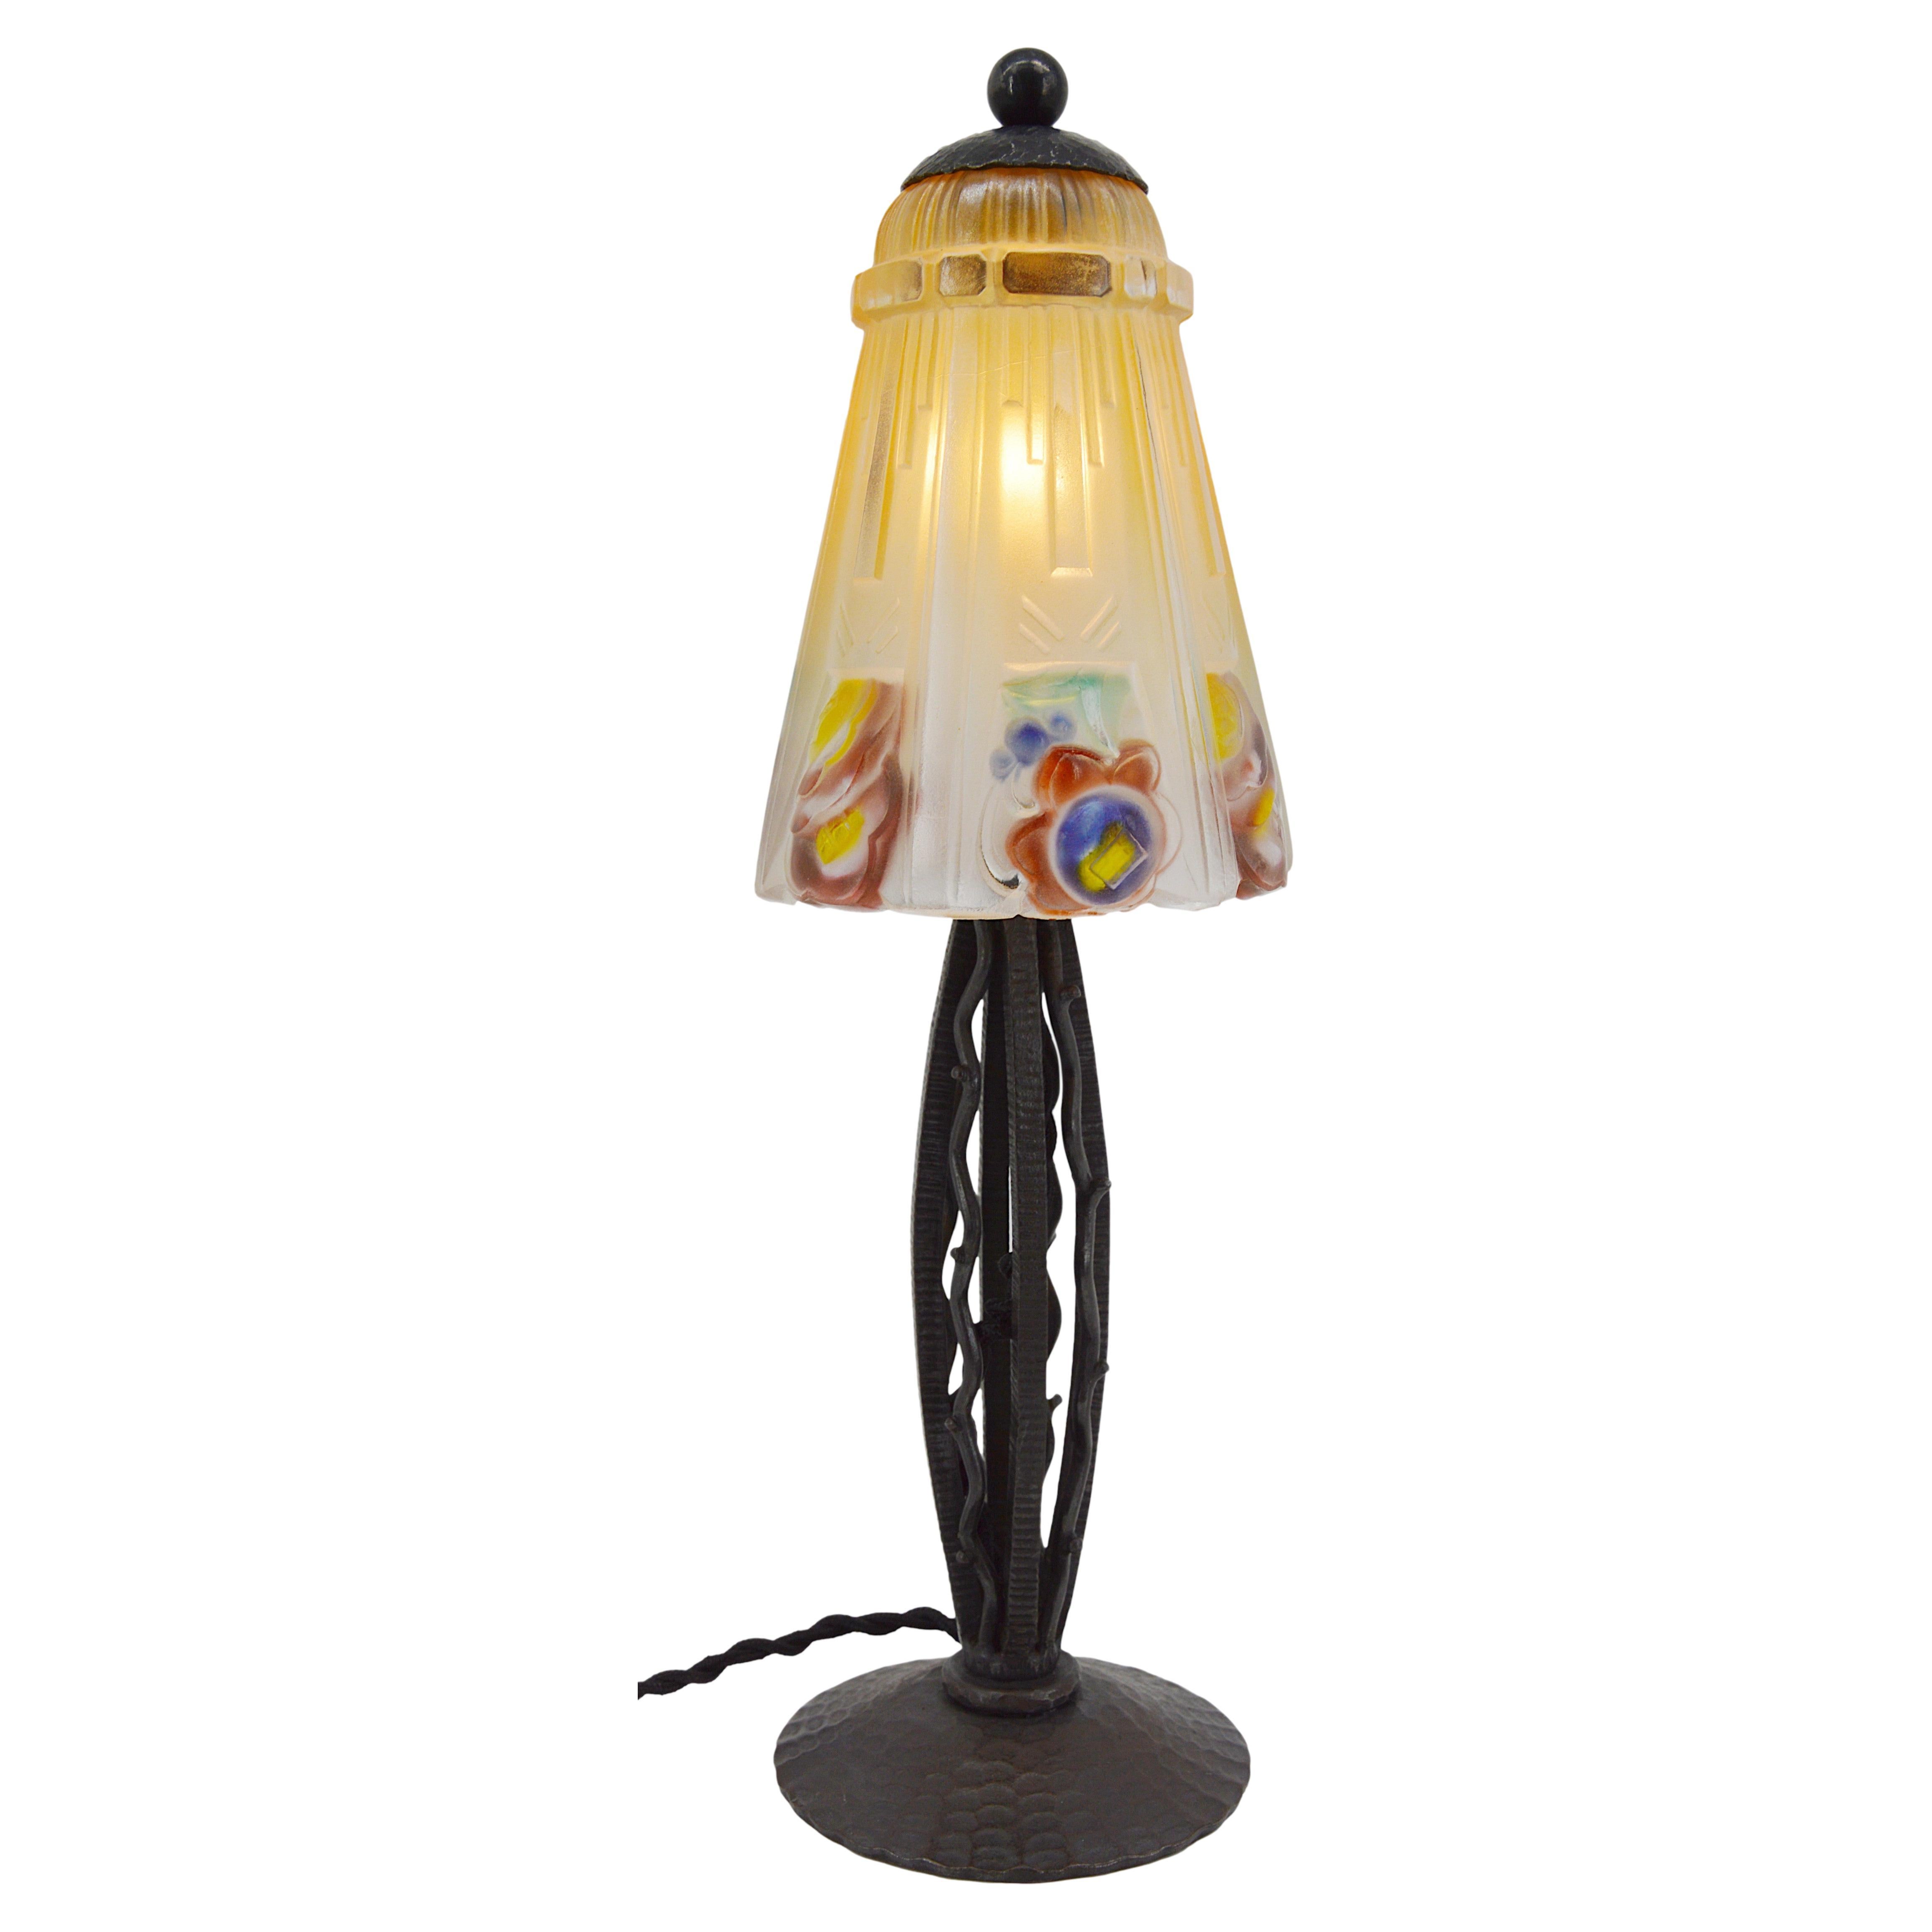 Jean Gauthier French Art Deco Table Lamp, 1920s For Sale